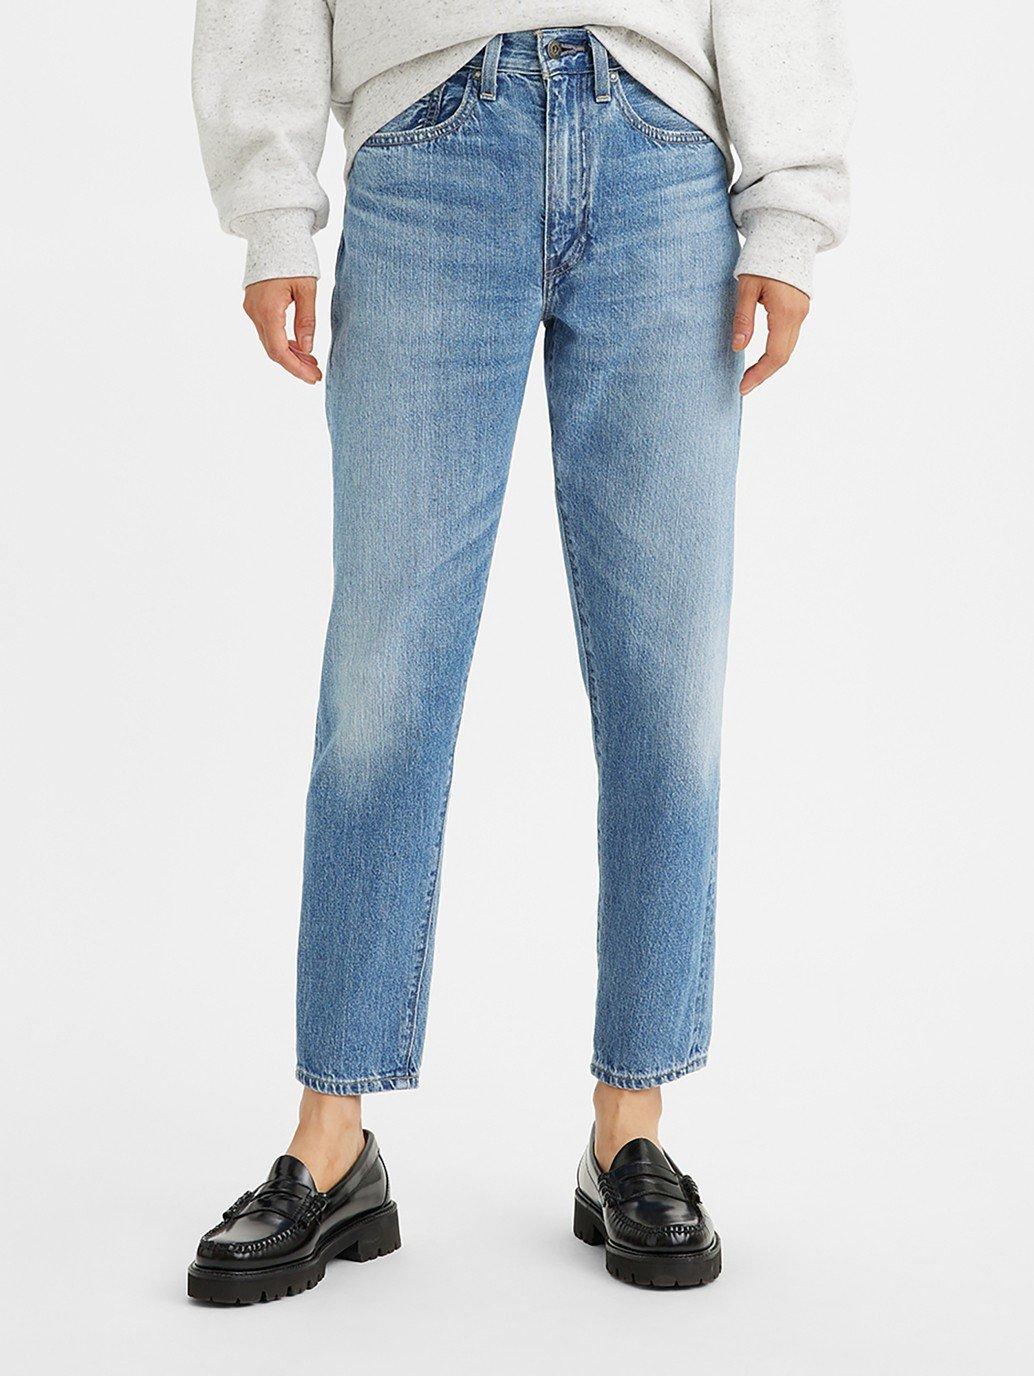 Buy Levi's® Made & Crafted® Women's High-Rise Boyfriend Jeans | Levi's®  Official Online Store SG